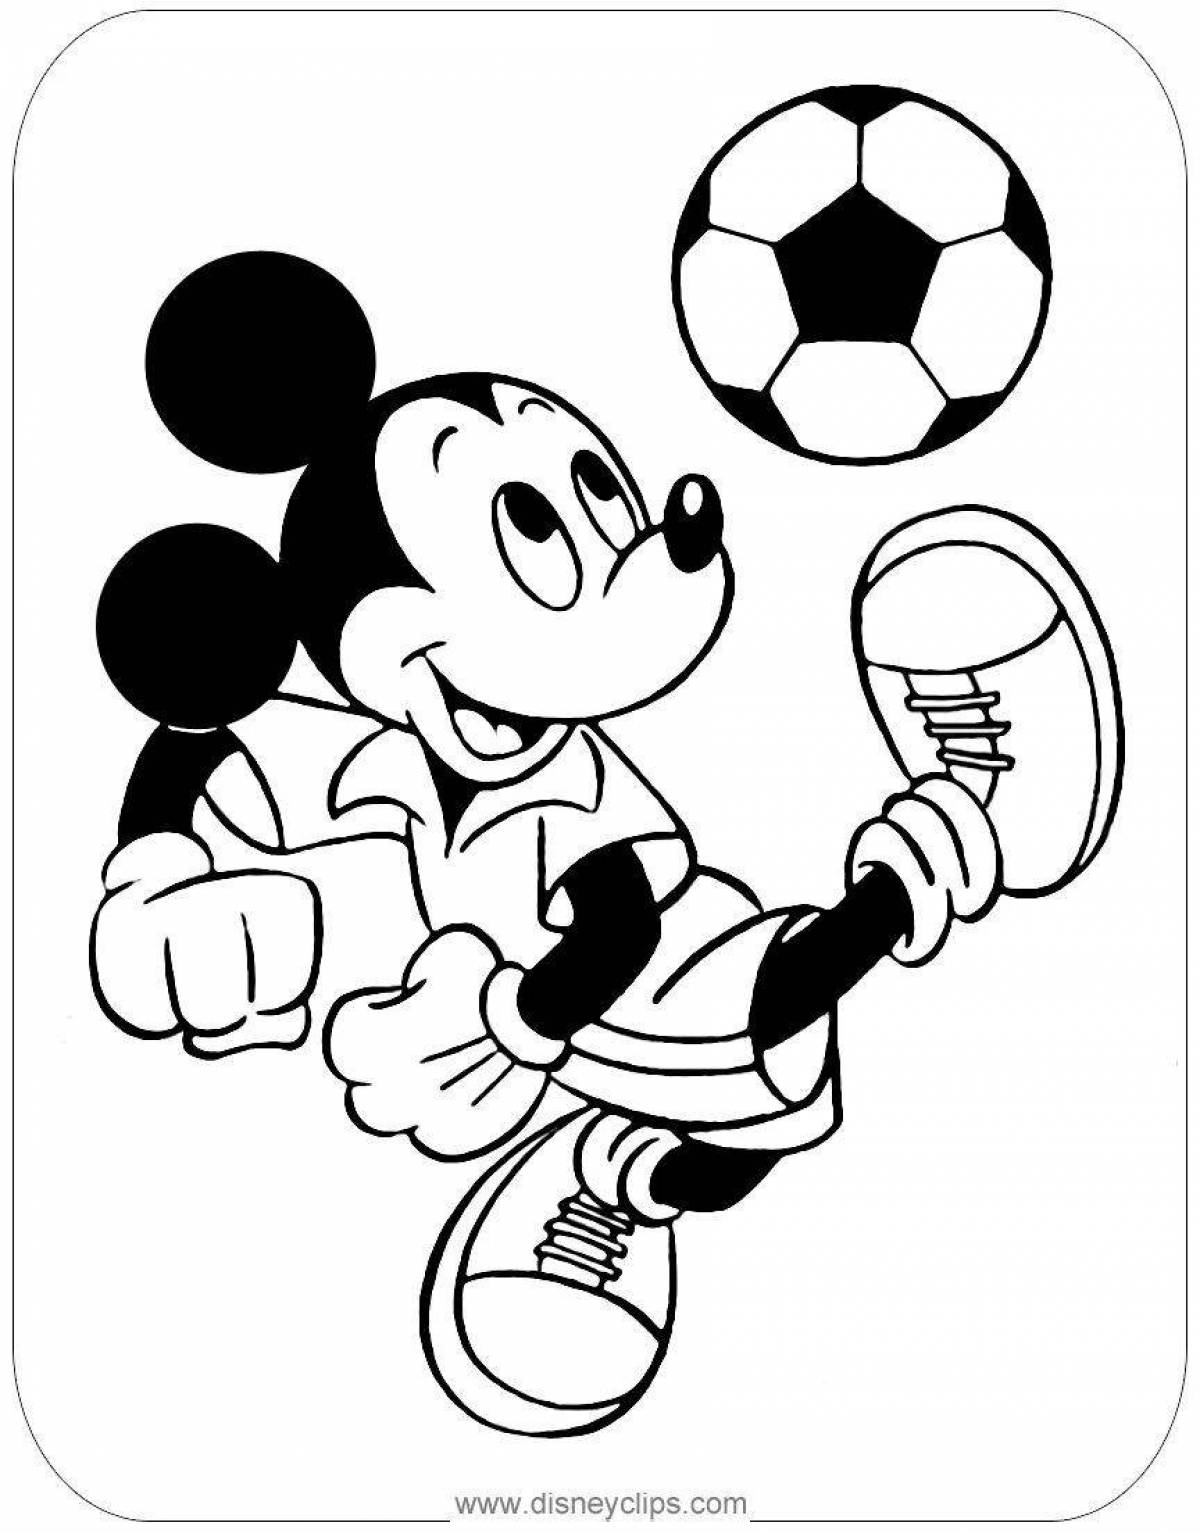 Mickey's exquisite game coloring book